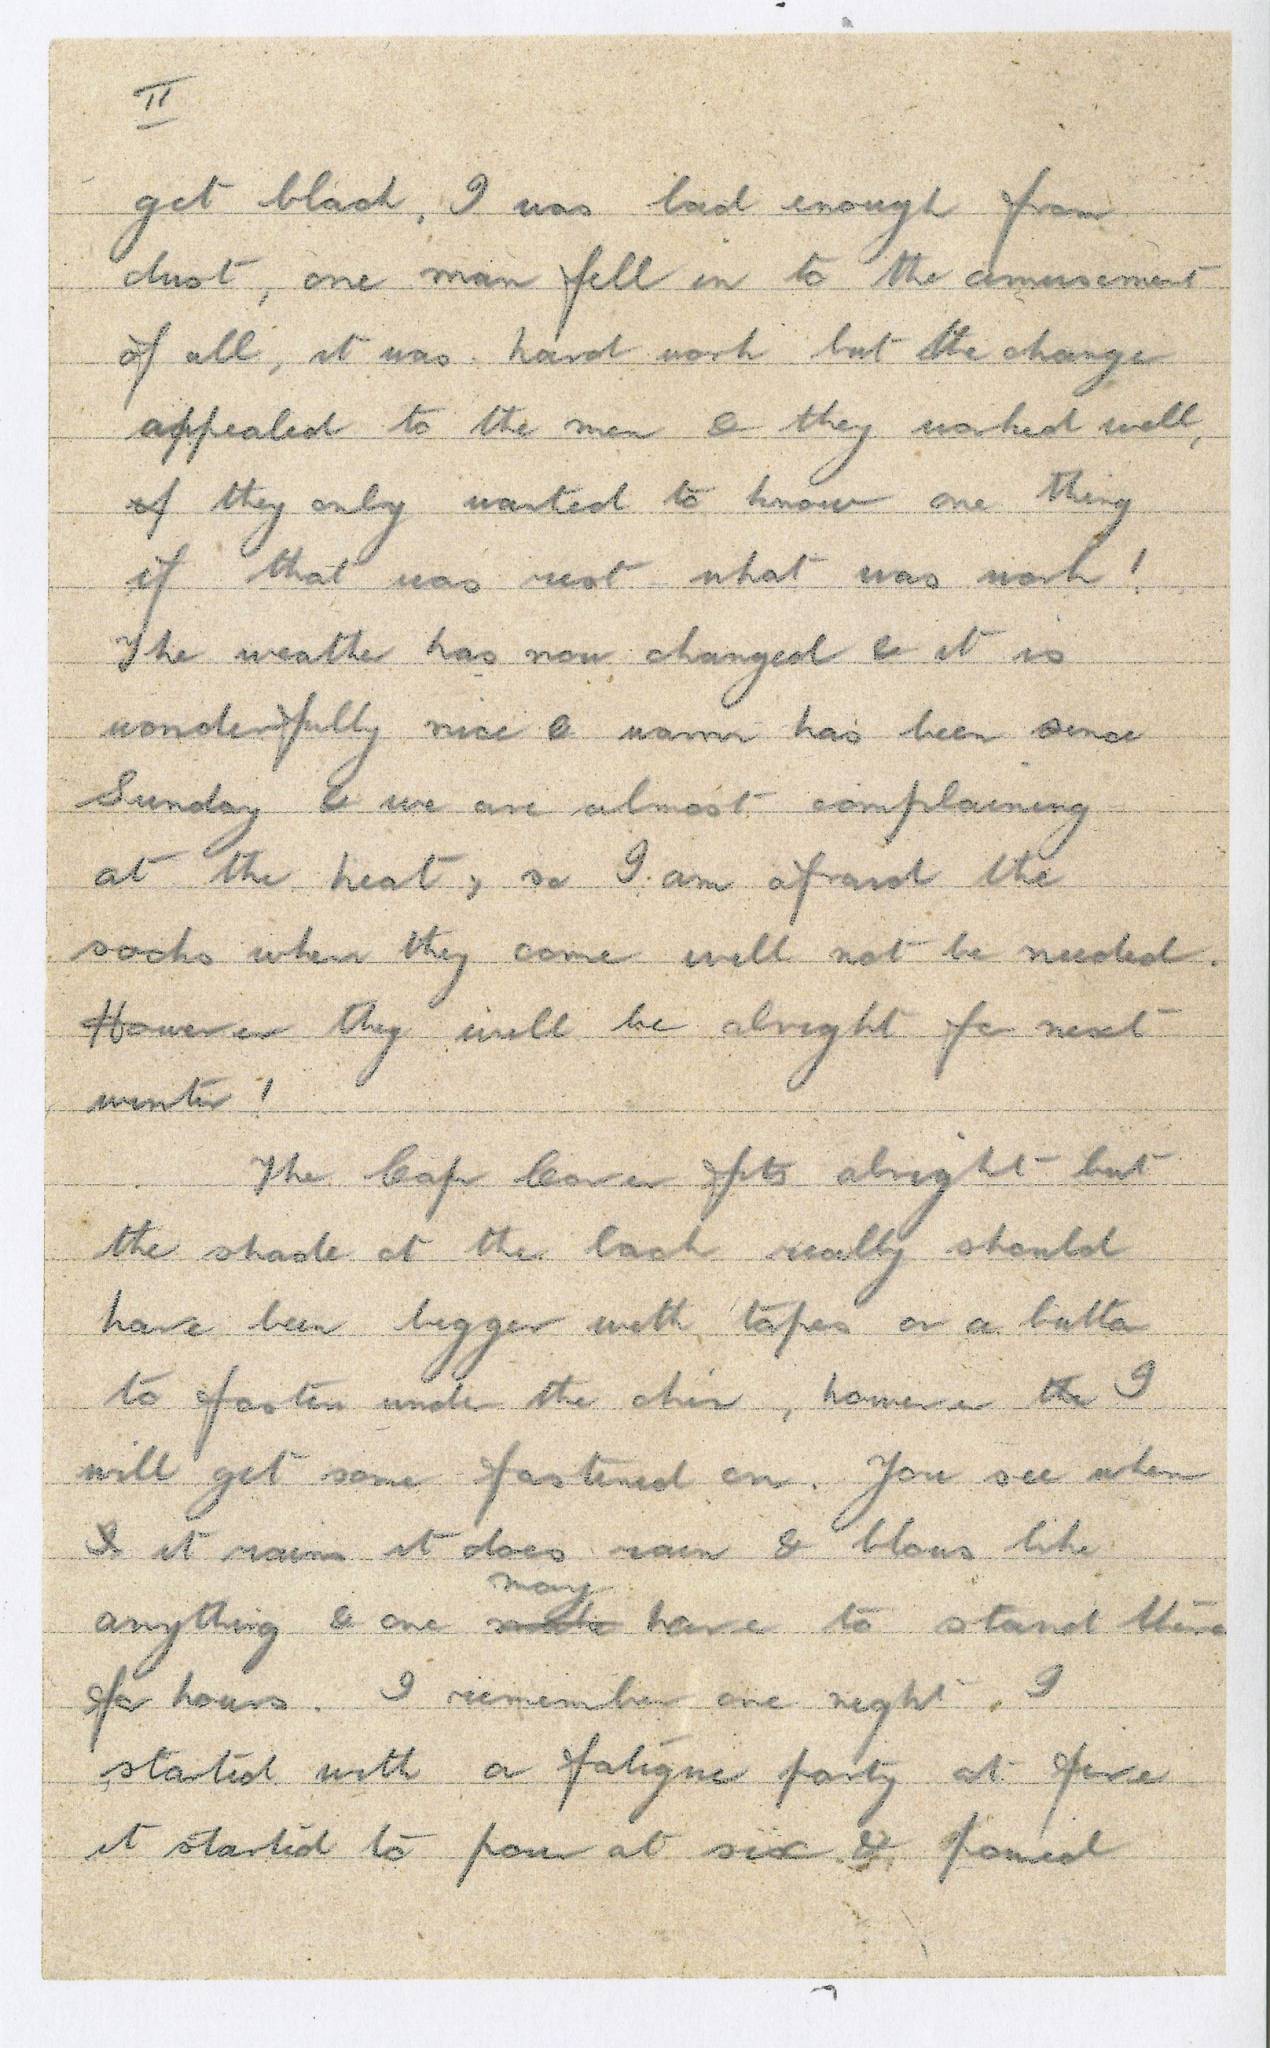 Styles AH letter 2 of 4. Photo courtesy of the Haines family archive.